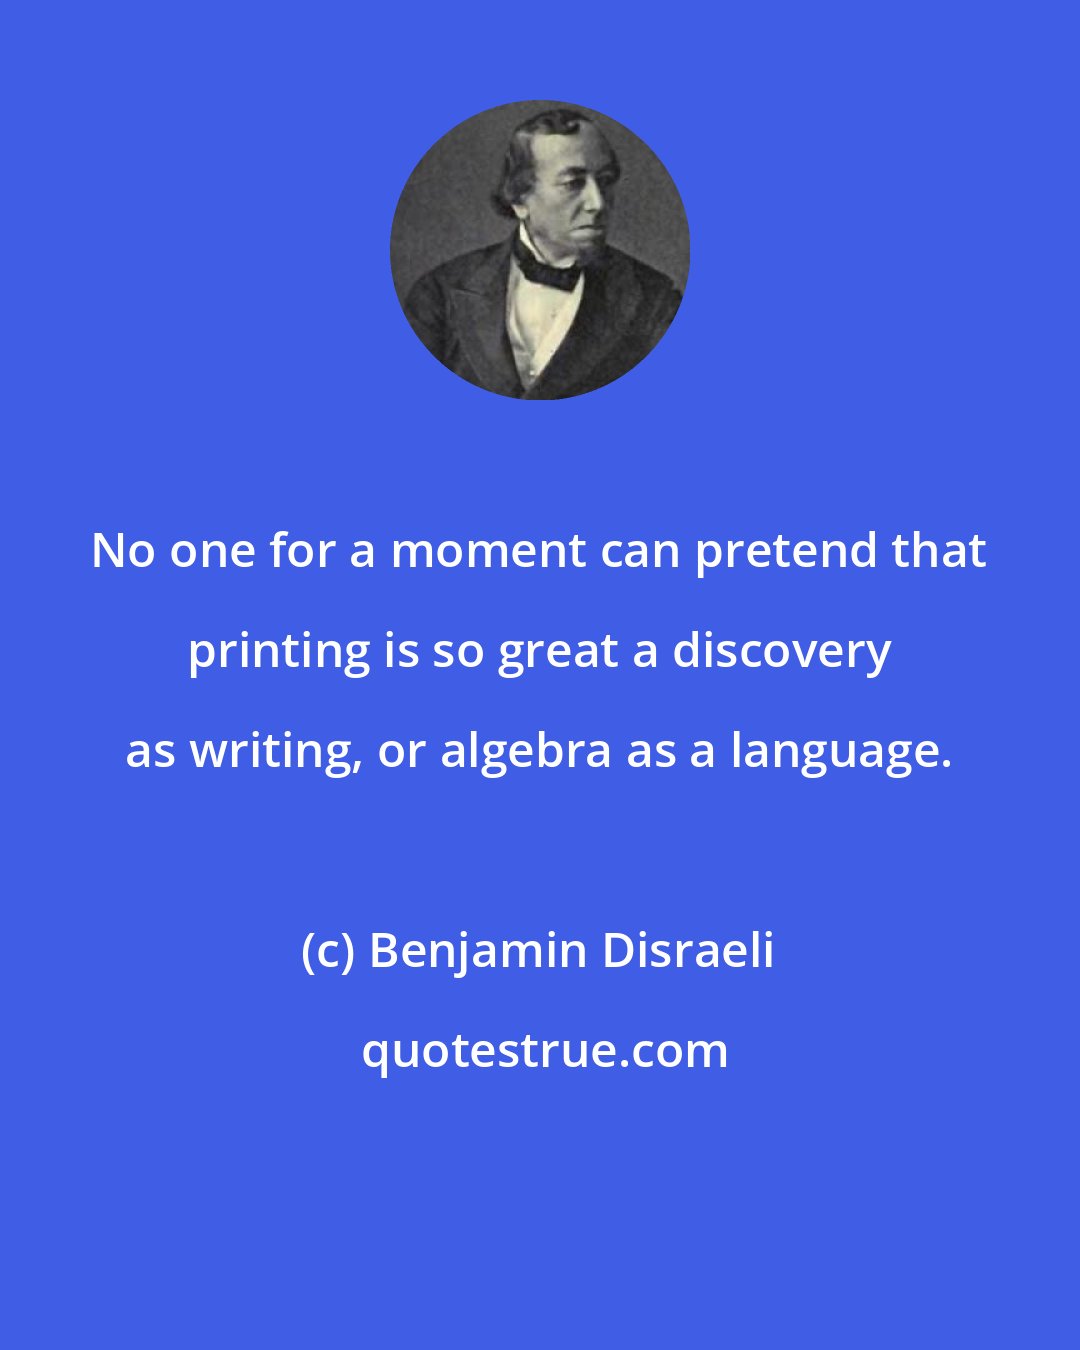 Benjamin Disraeli: No one for a moment can pretend that printing is so great a discovery as writing, or algebra as a language.